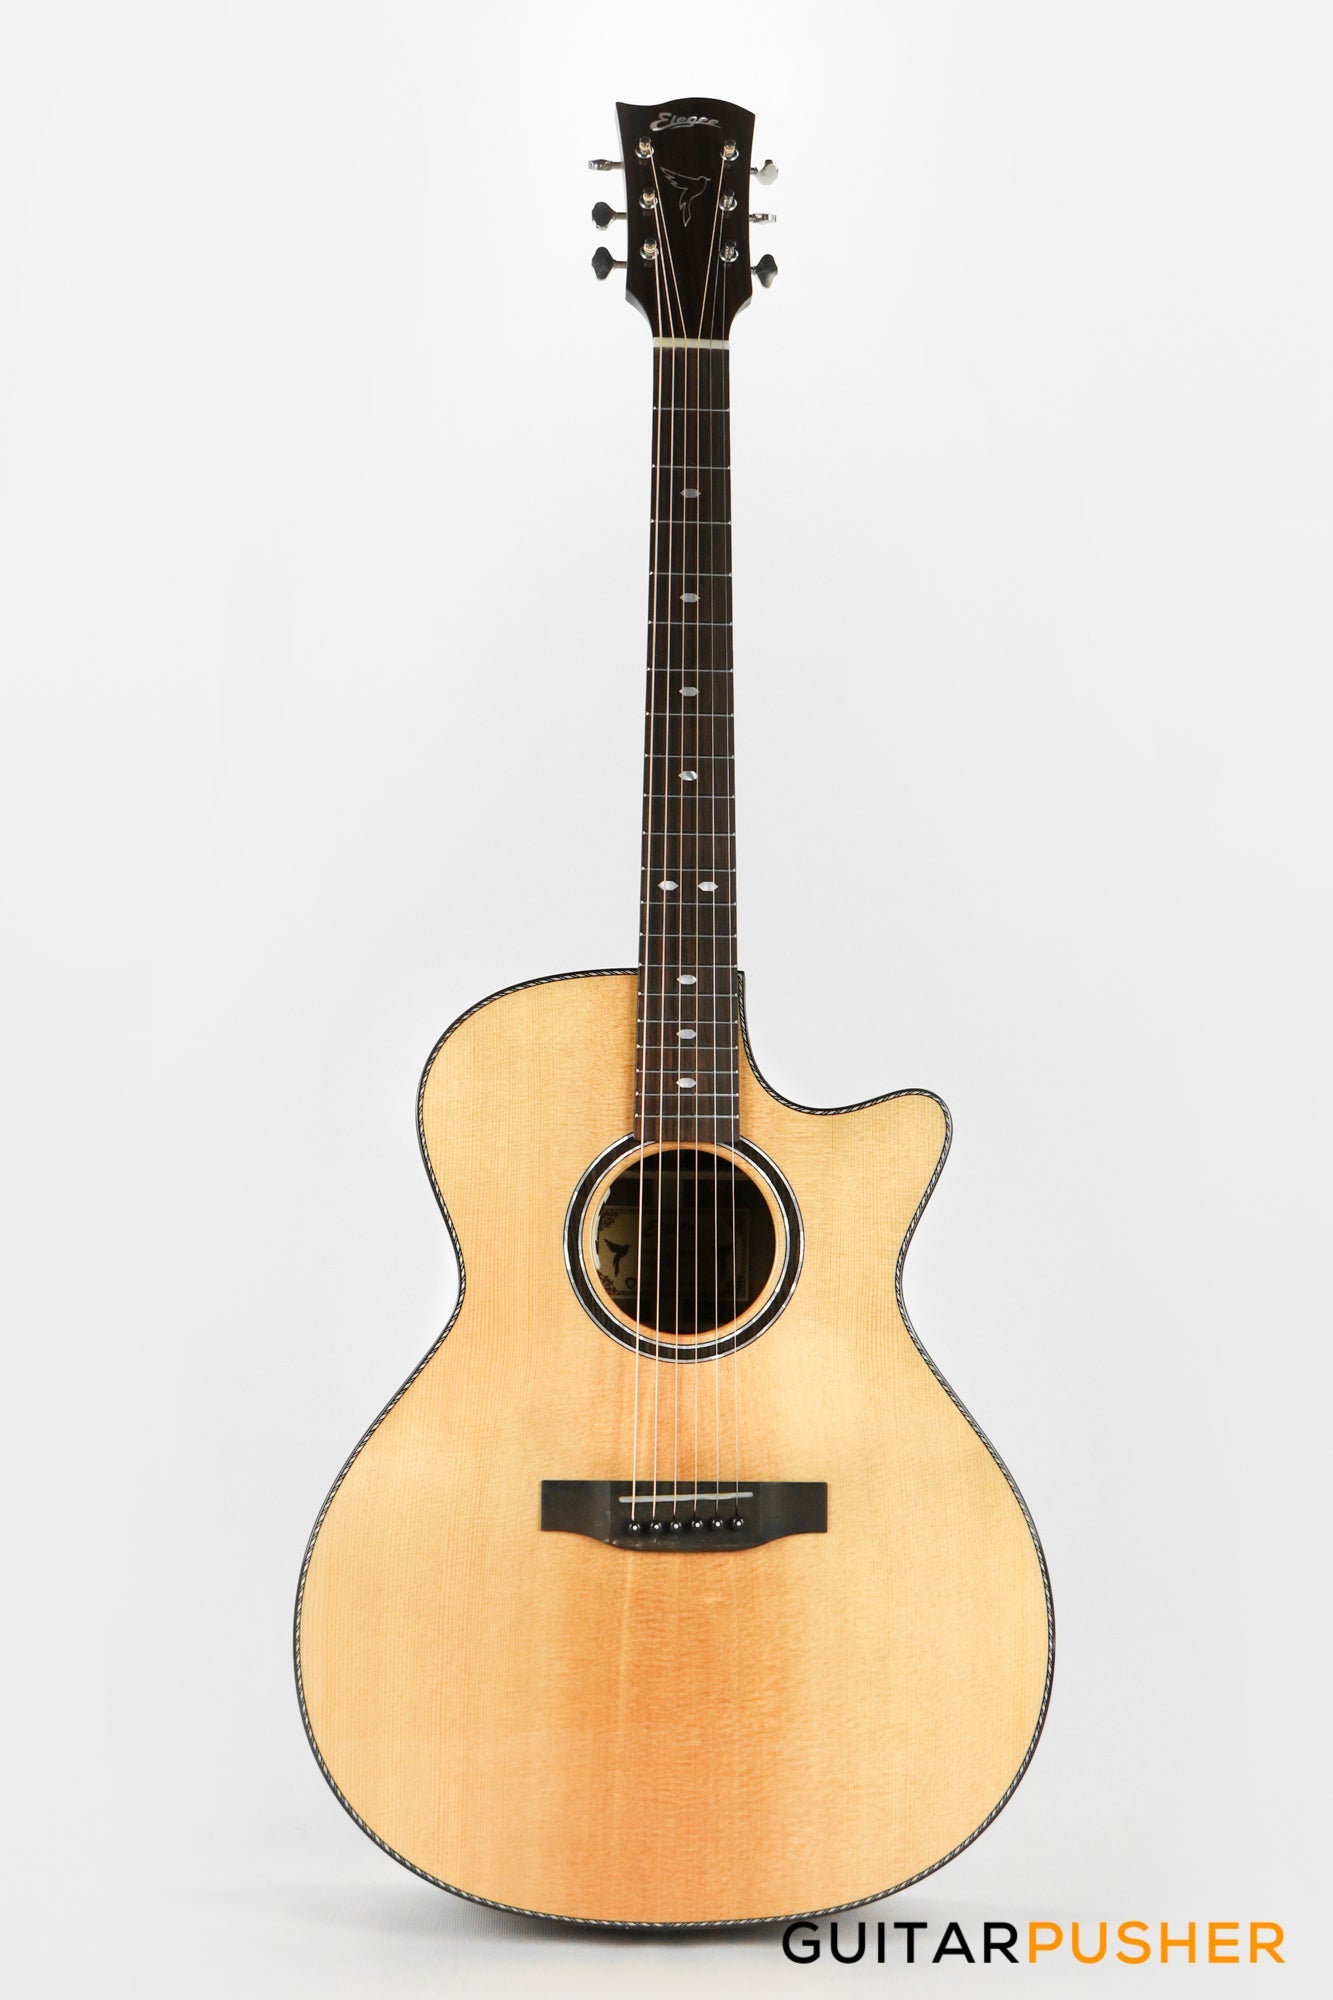 Elegee Adarna Solid Sitka Spruce Top Grand Auditorium Acoustic-Electric Guitar with Dual Pickup System